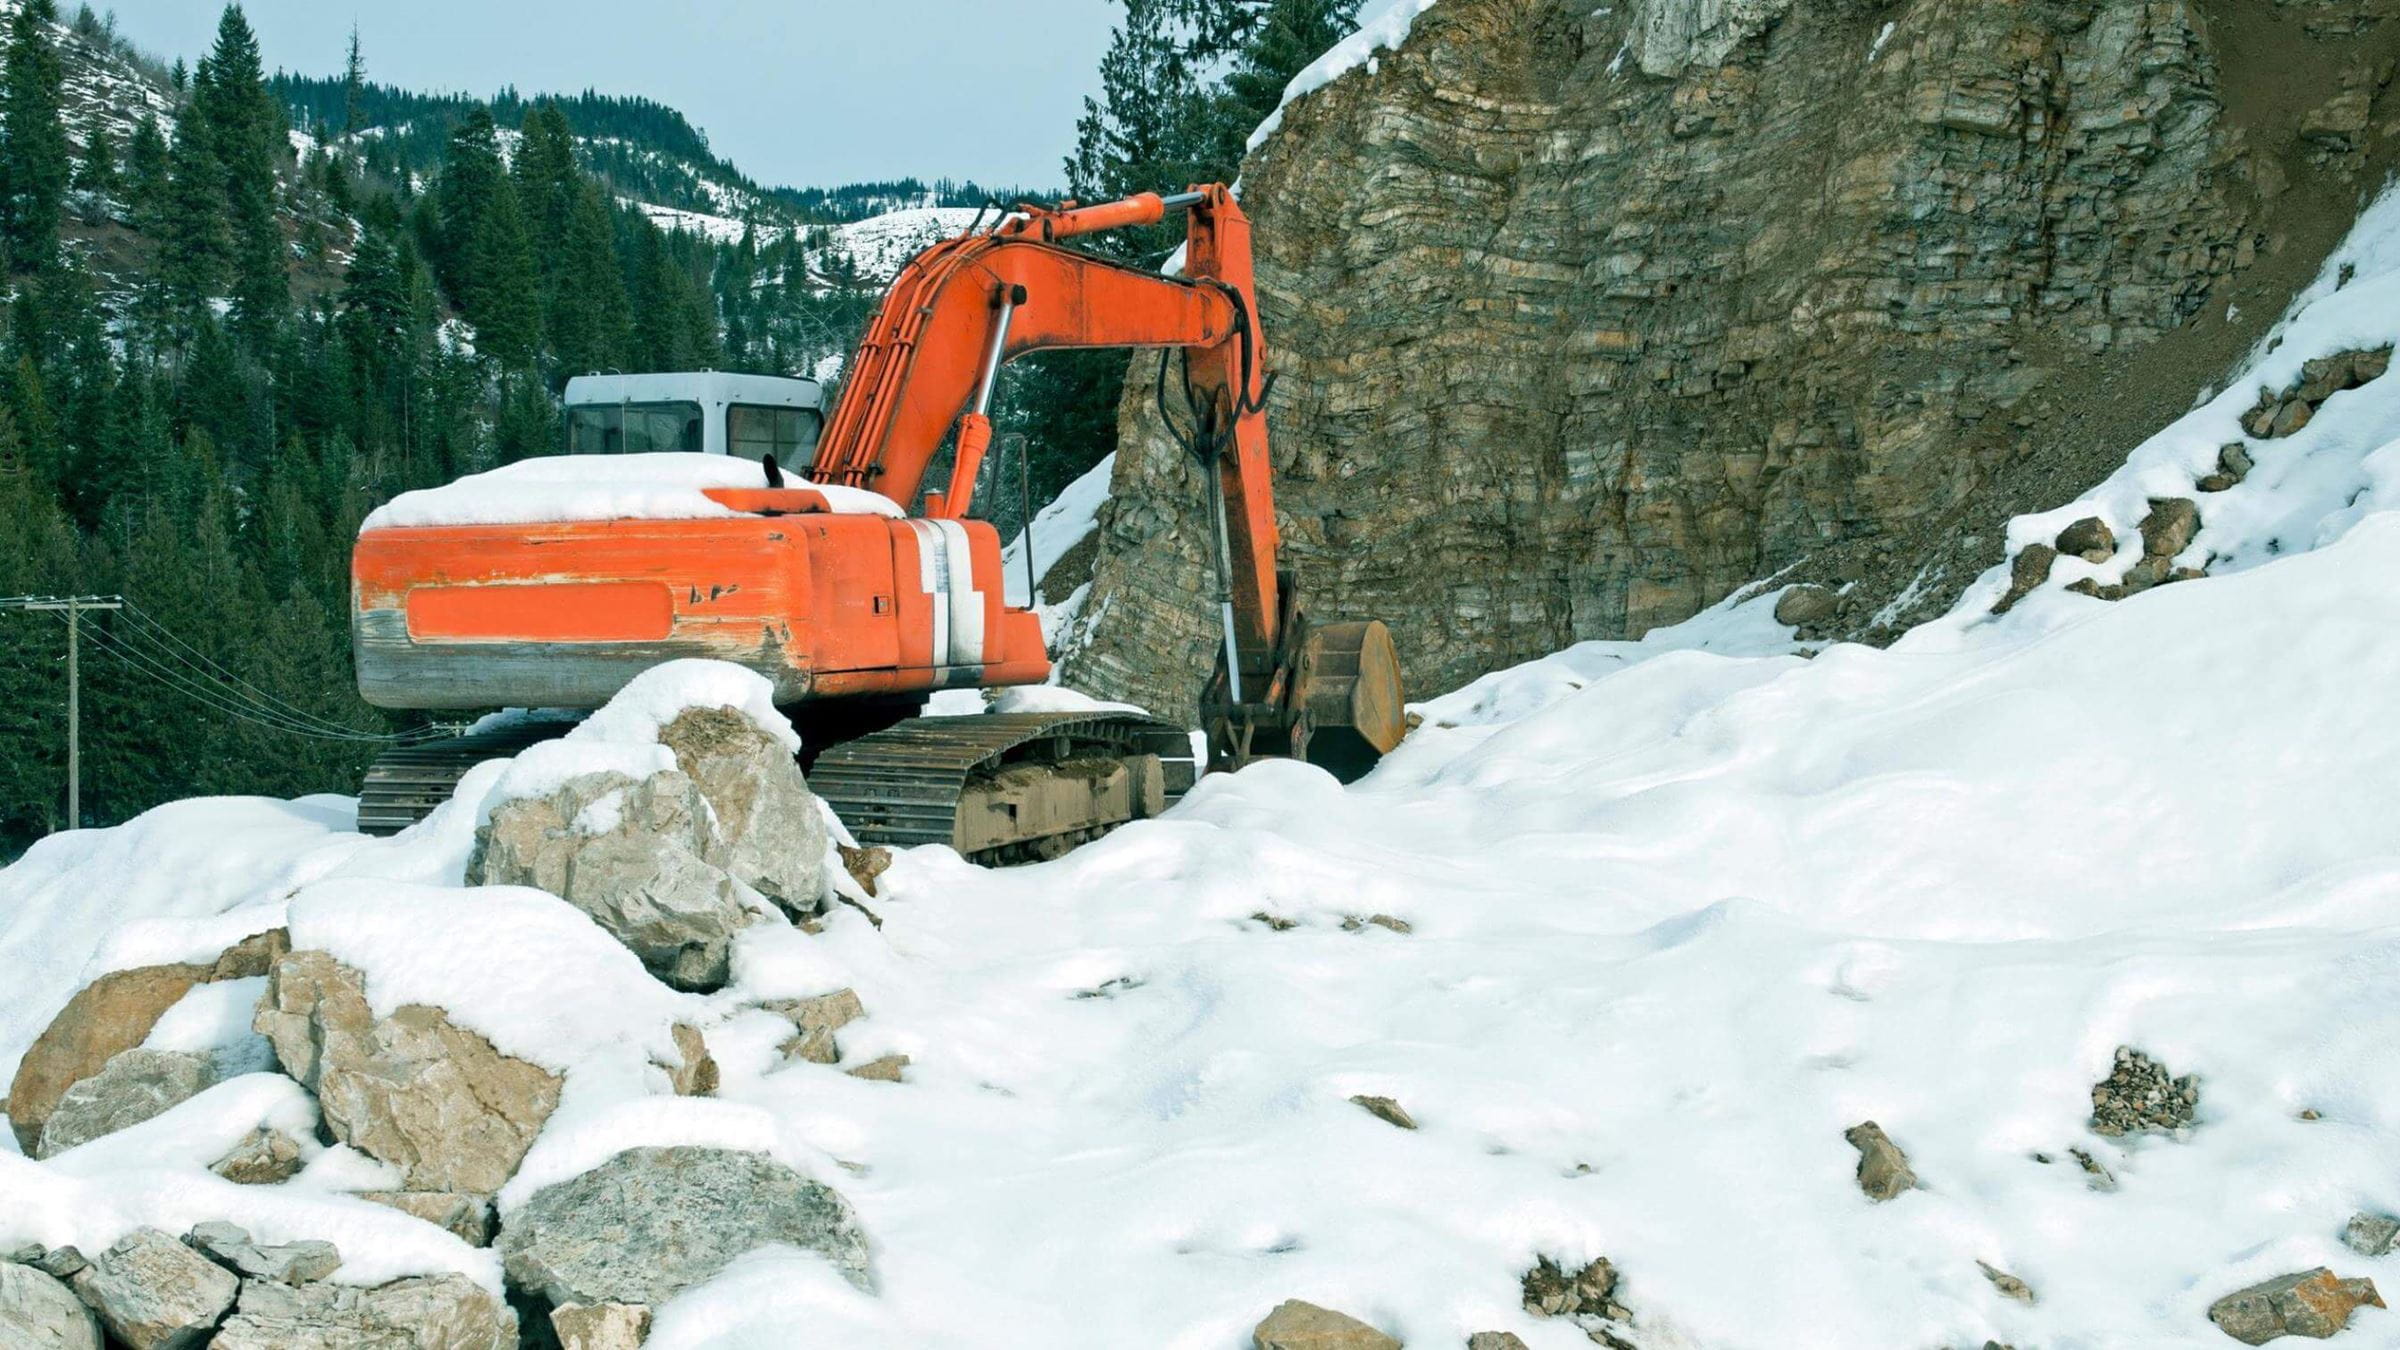 Excavator digging on a snowy mountainside